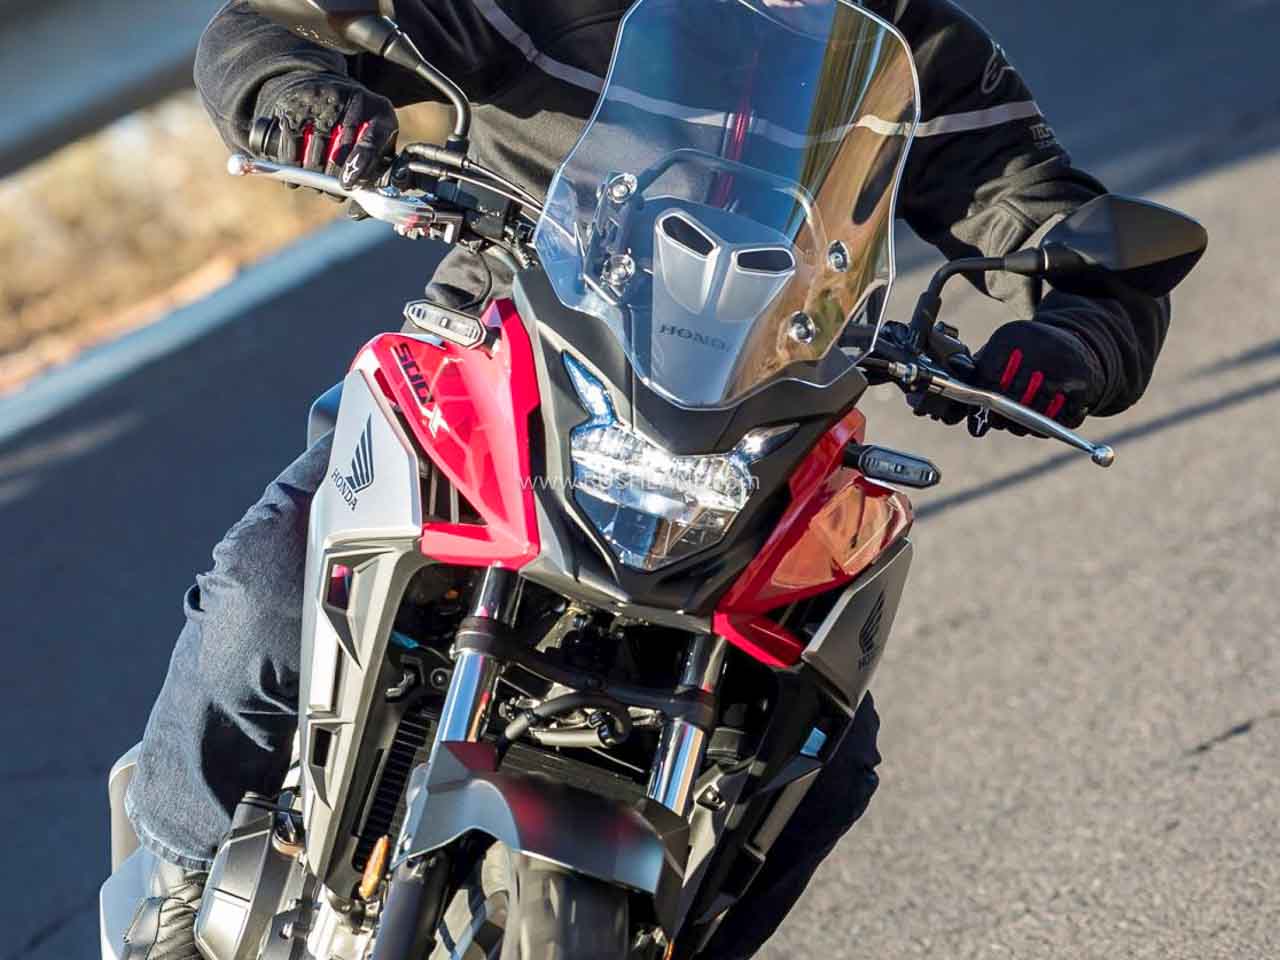 Honda CB500X ADV Motorcycle India launch Planned For April 2021